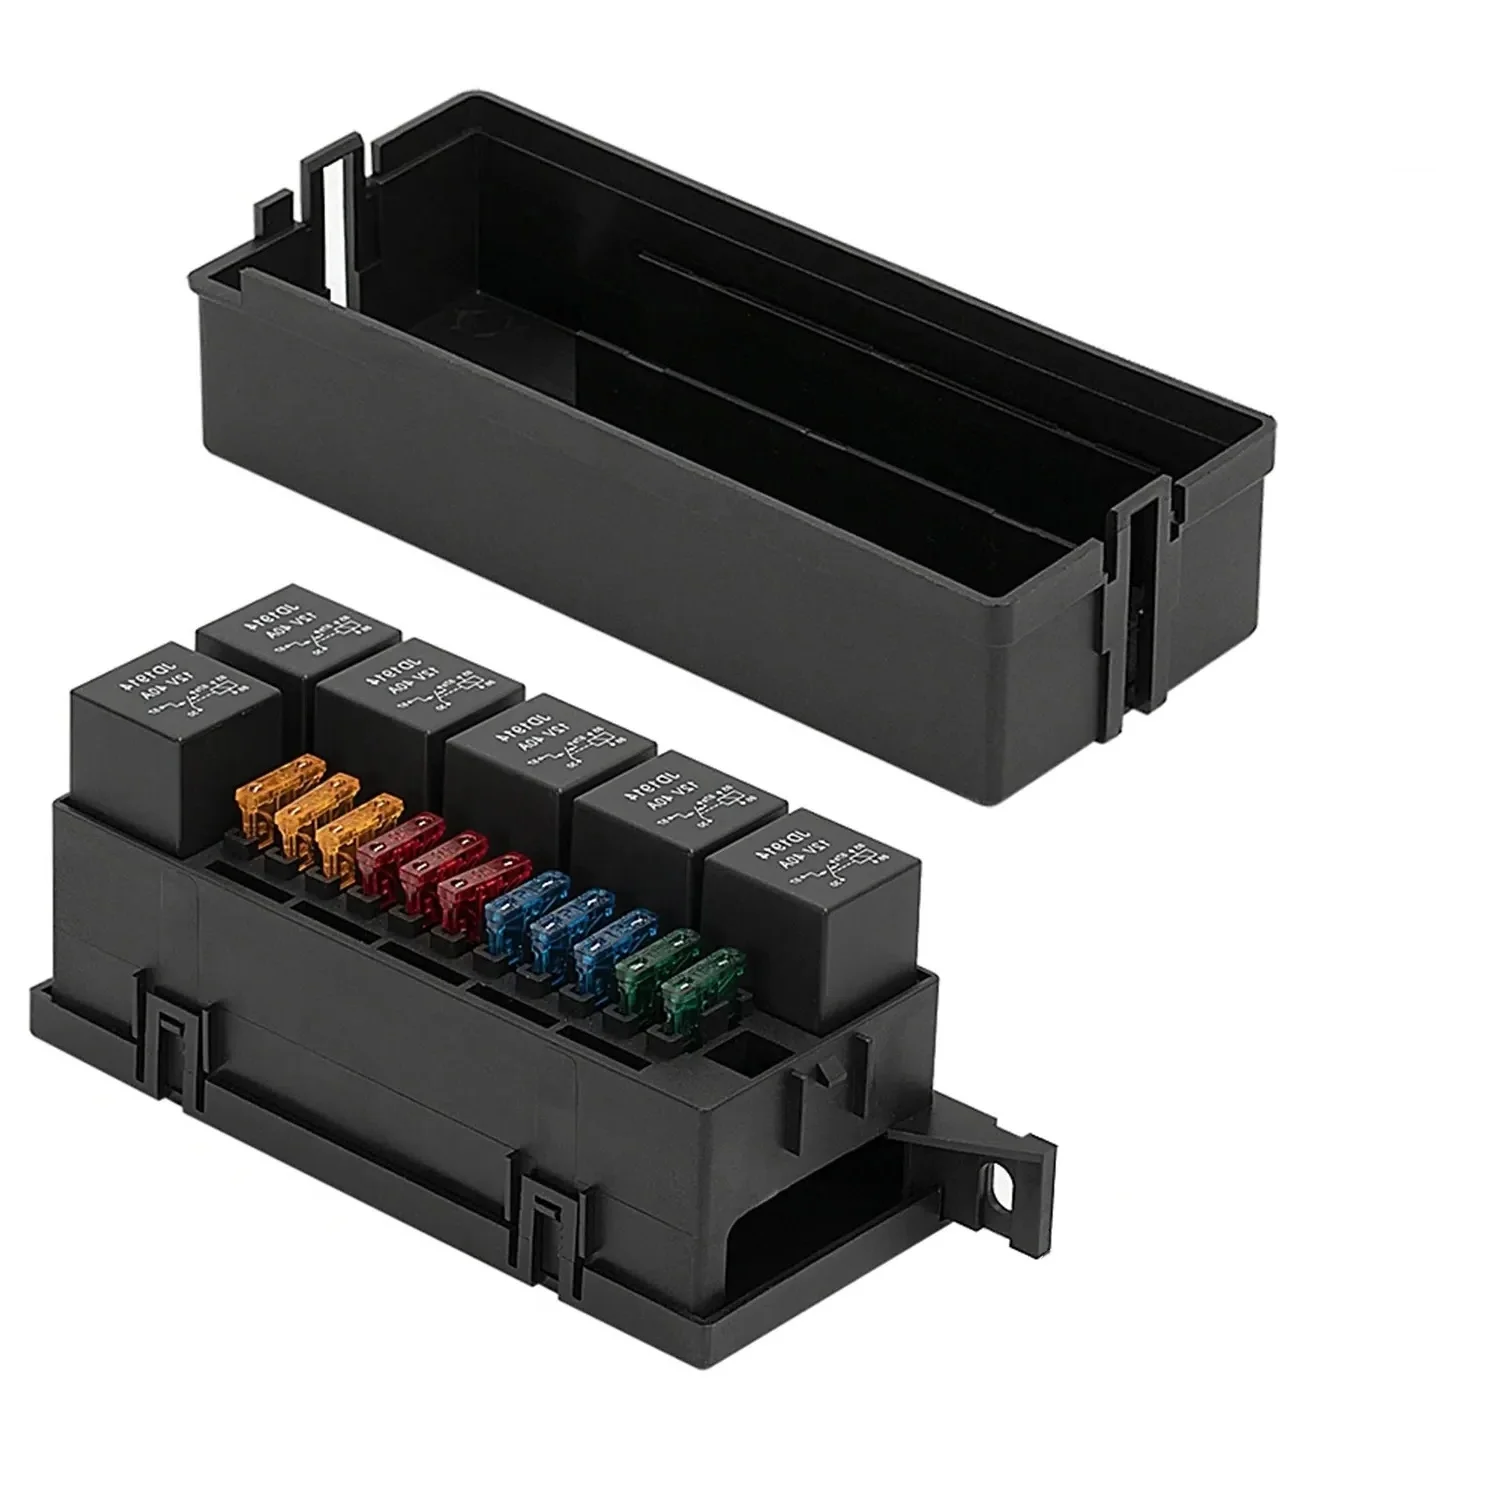 

12V Auto 11 Way Fuse Relay Box Block With 5 Pin Relay and Fuses For Automotive Car Marine Truck Trailer Boat